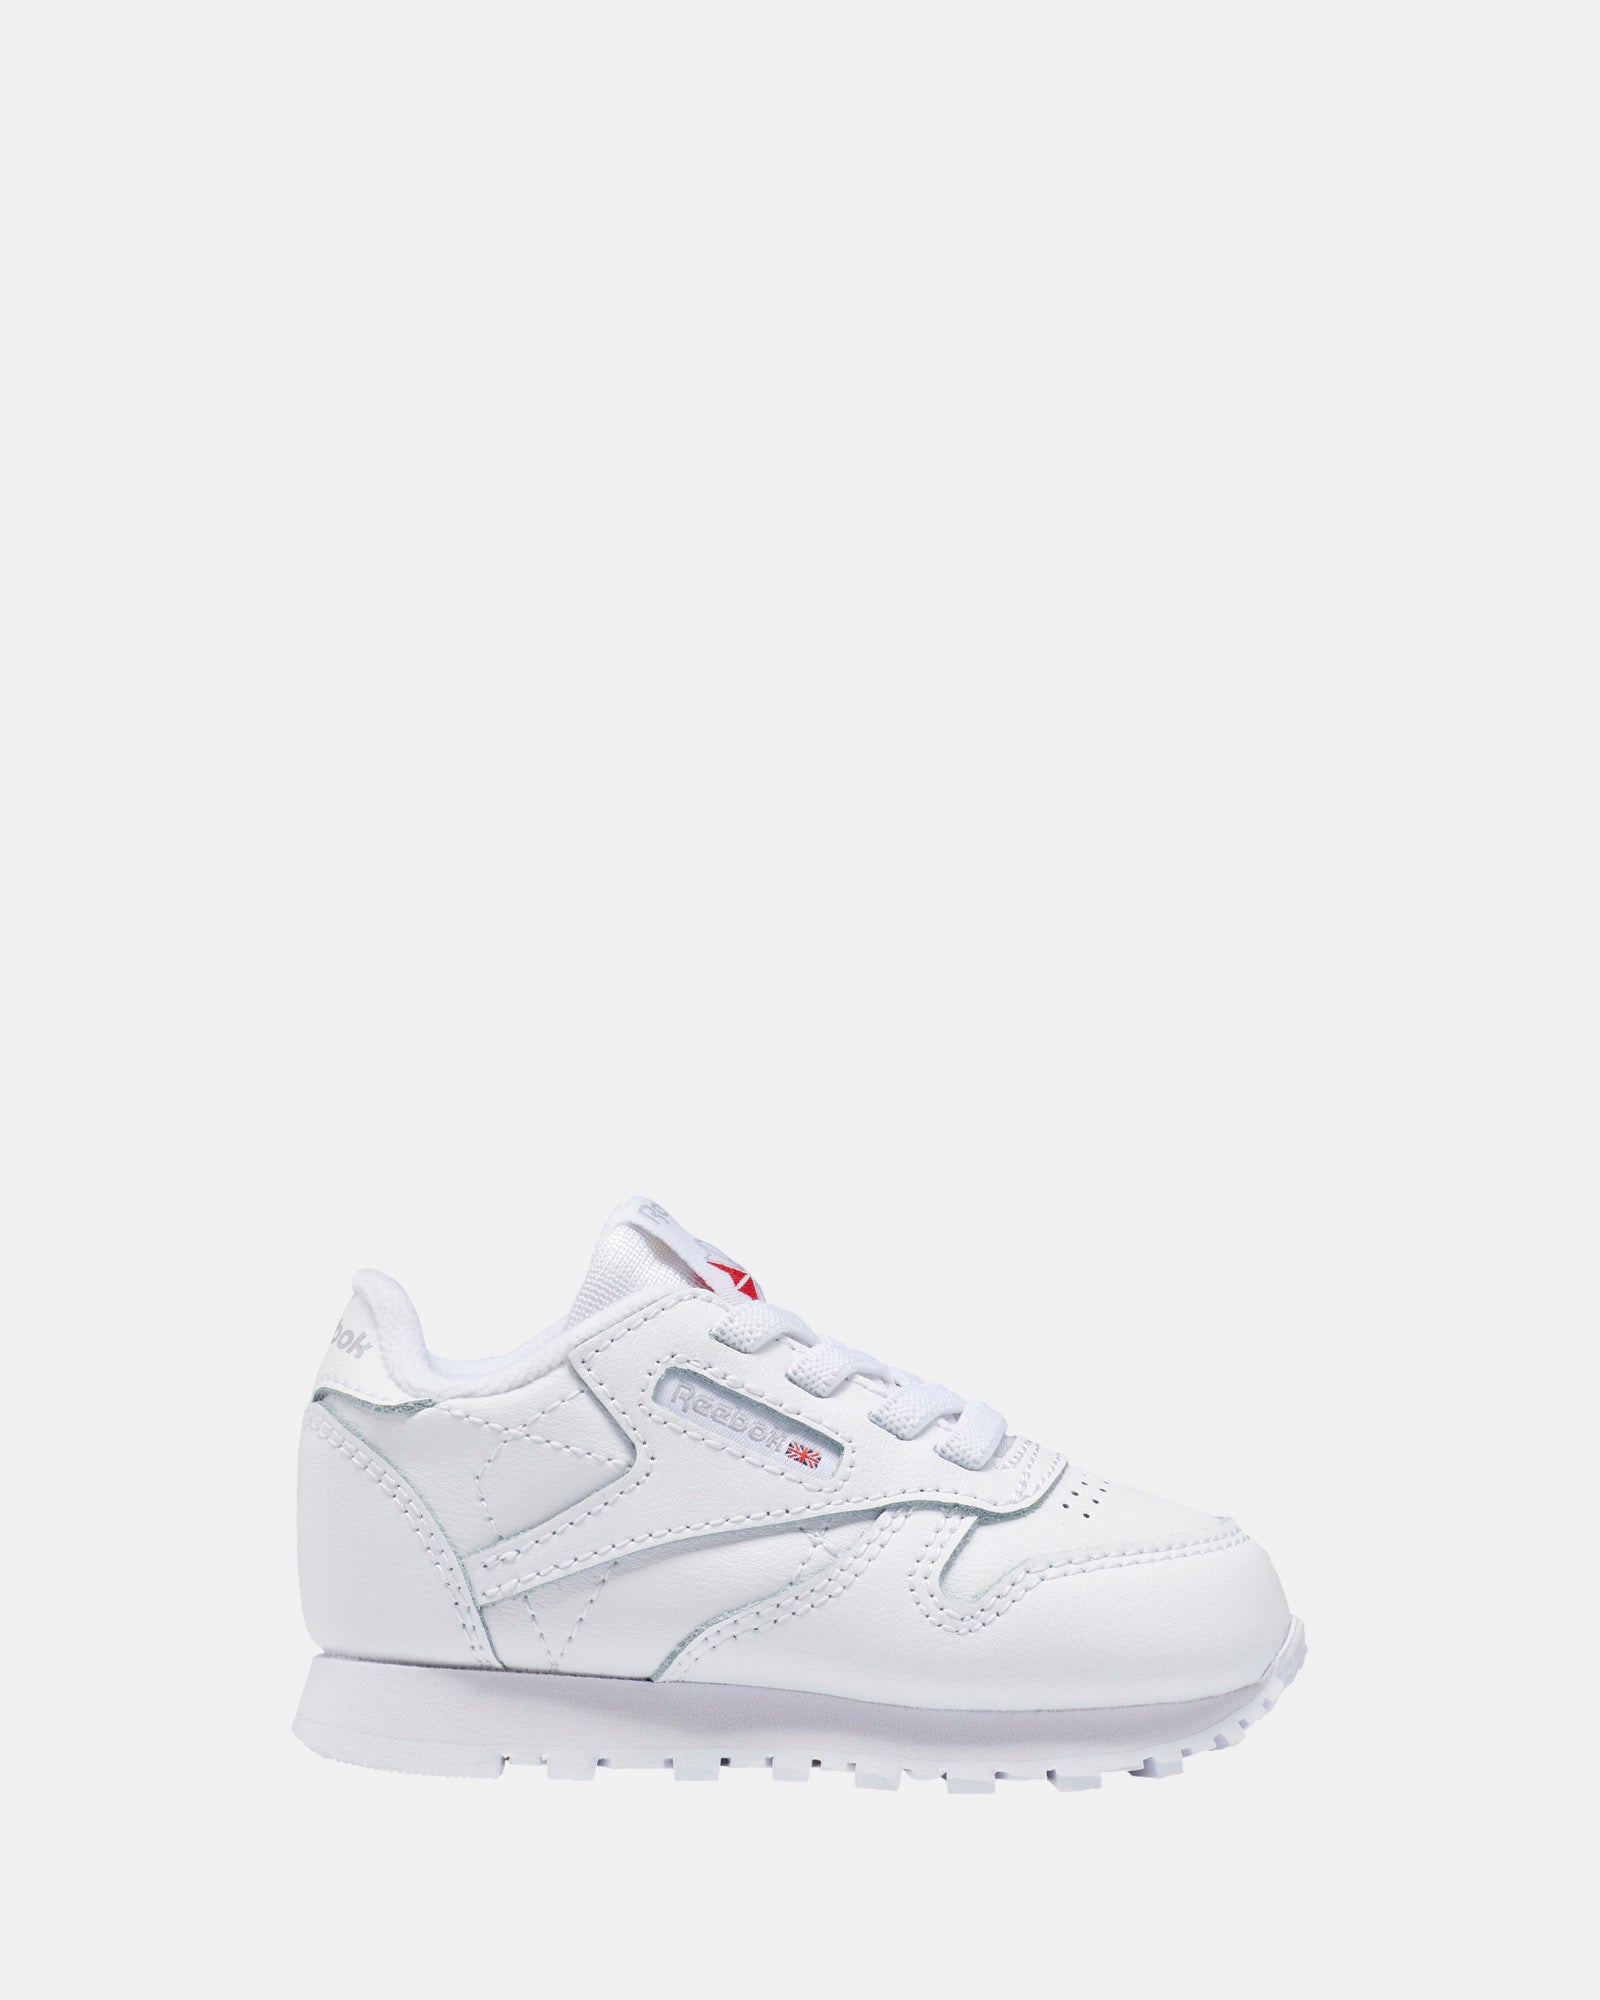 Classic Leather Shoes - Toddler White/White/White